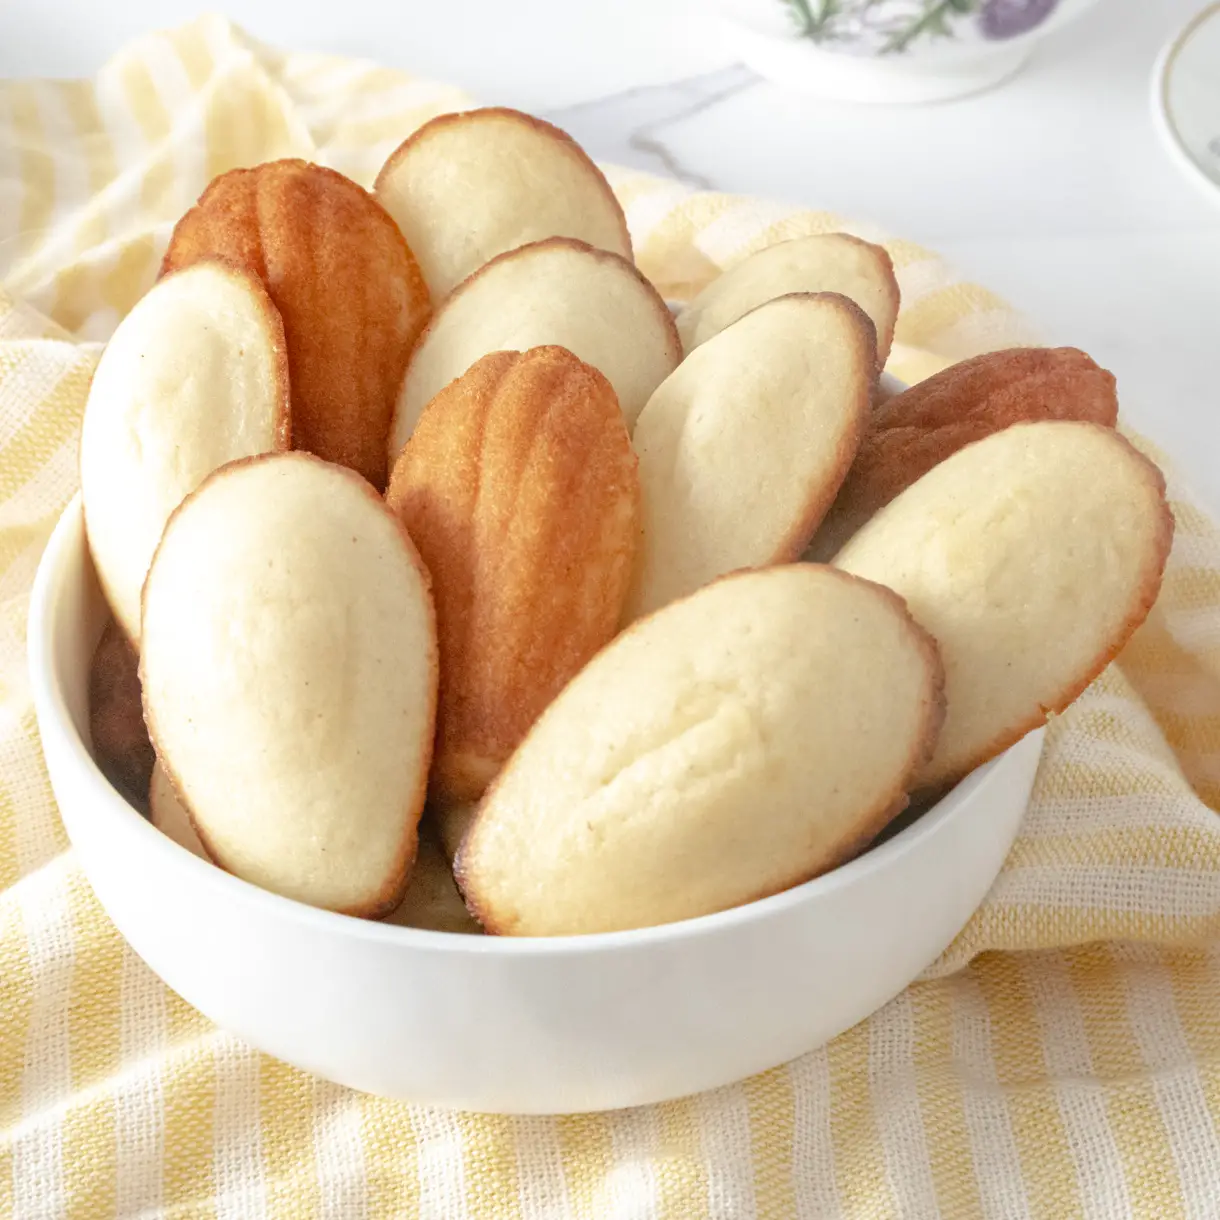 Vegan lemon madeleines layered in a white bowl on a yellow tablecloth